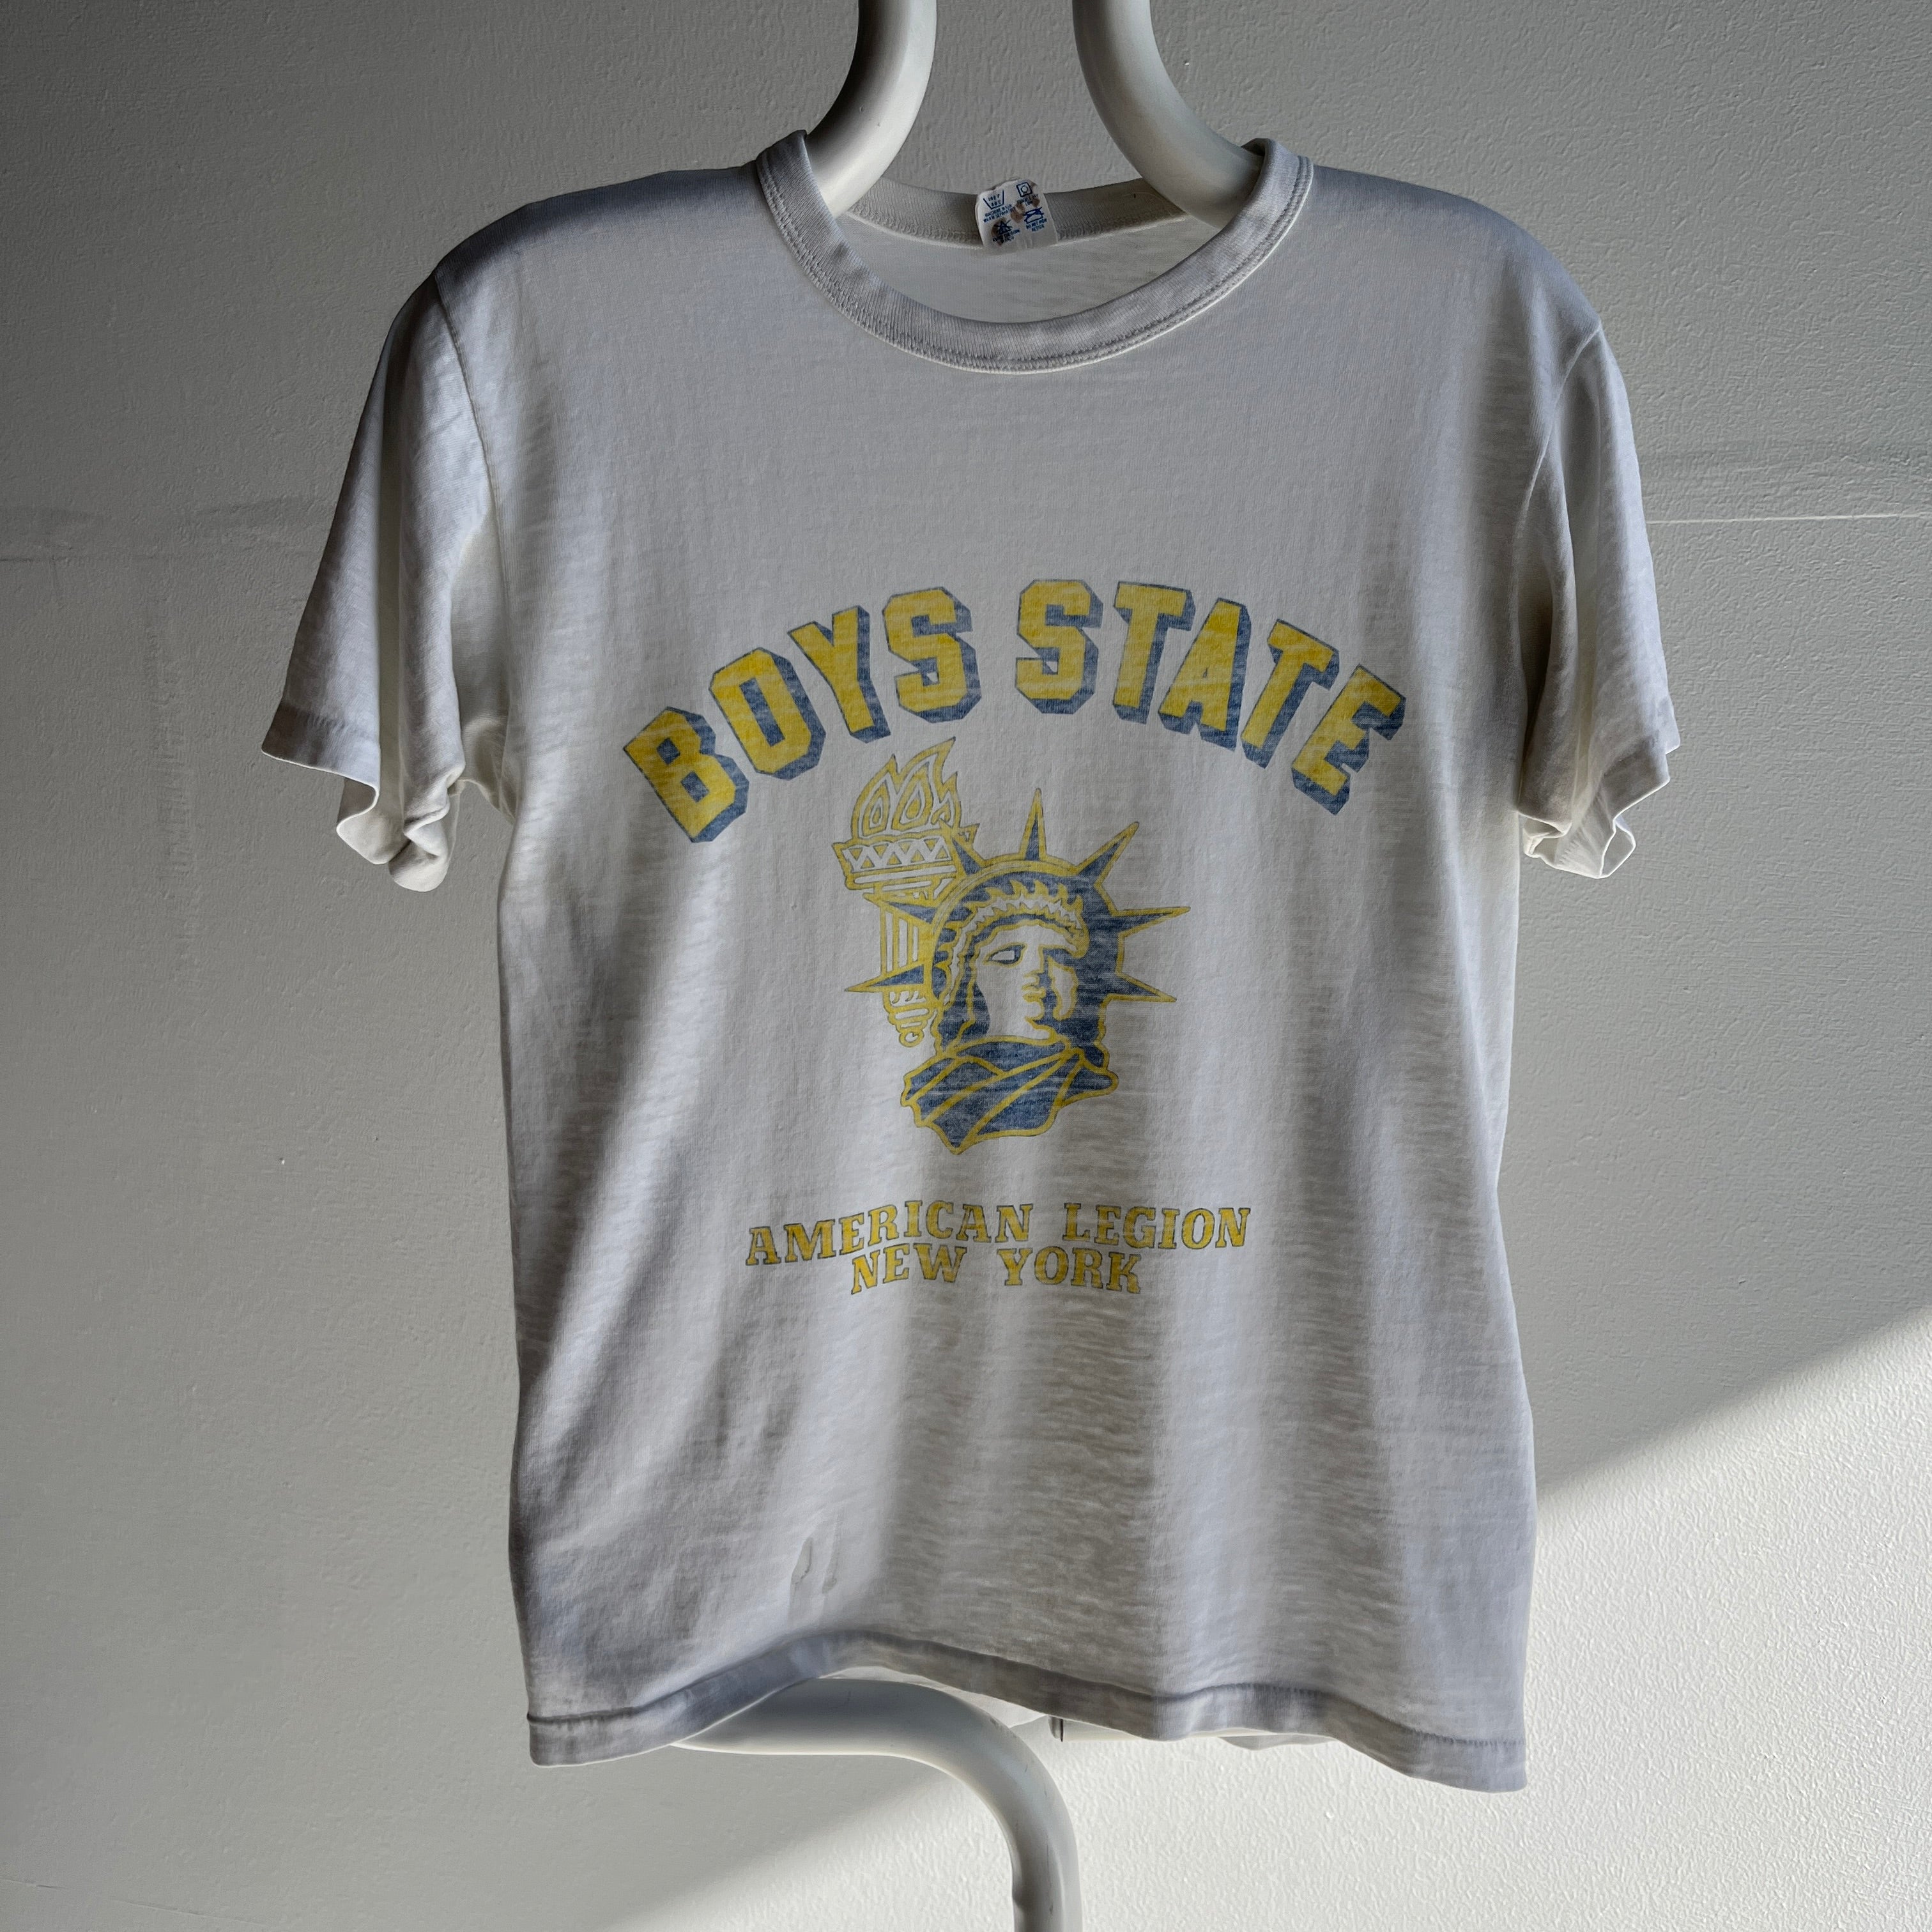 1970/80s New York Boys State Tissue Paper Thin T-Shirt by Champion - Oh My